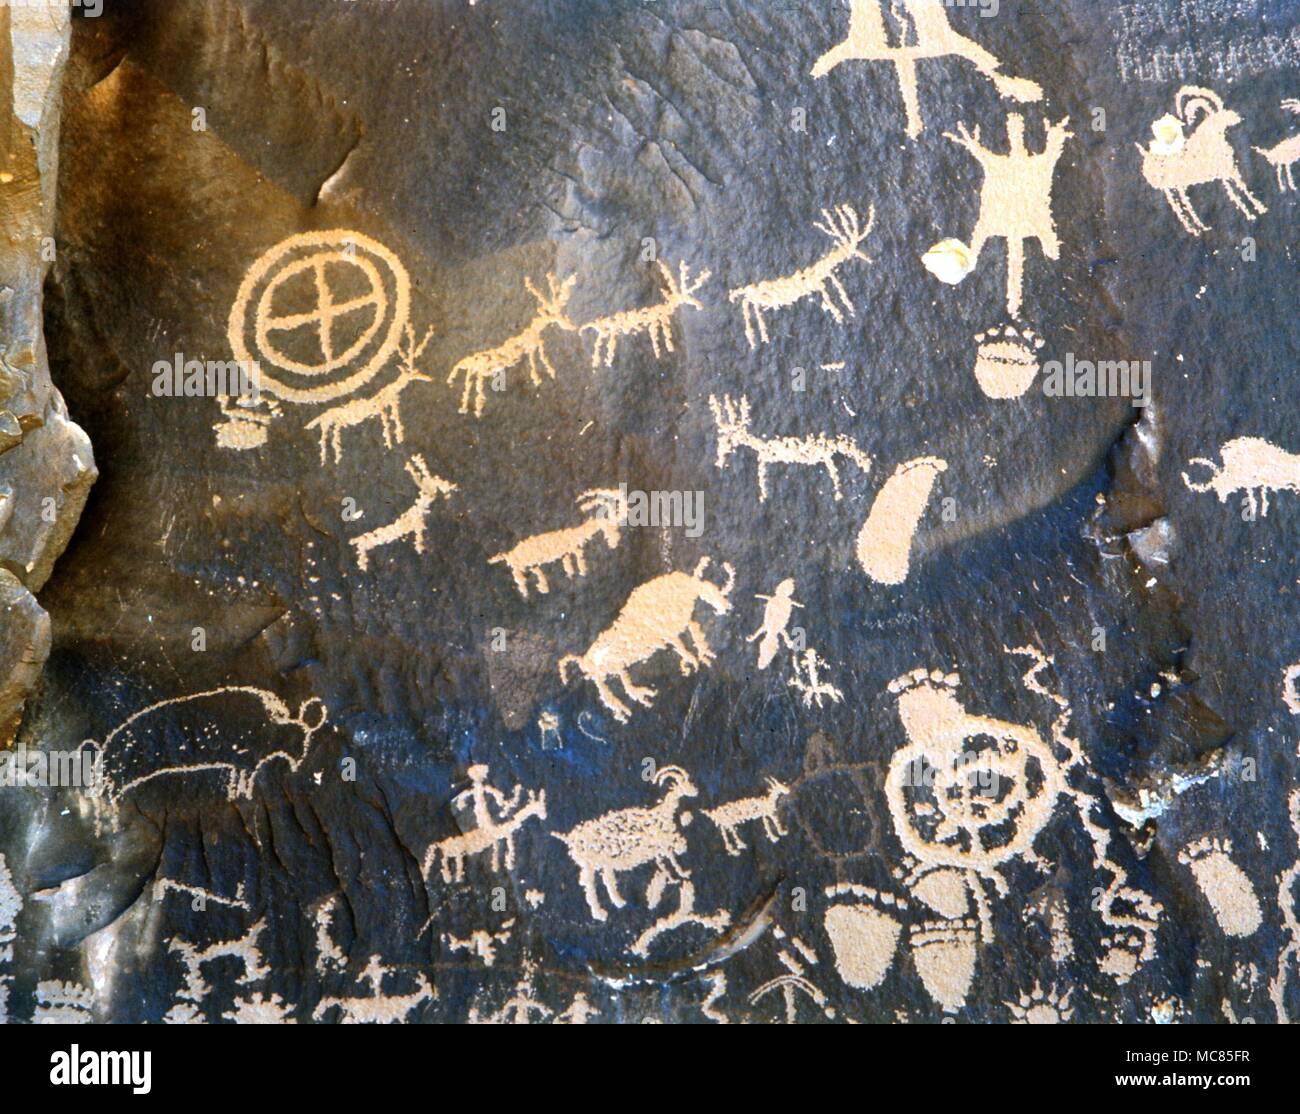 Petroglyphs - North American Indians. Incised and painted designs (petroglyphs) depicting gods, medecine-men, cattle, serpents, or serpent lines, and a variety of other symbols, including 'prints' of human feet. These petroglyphs are on the so-called Newspaper rock, in the Utah desert. Stock Photo